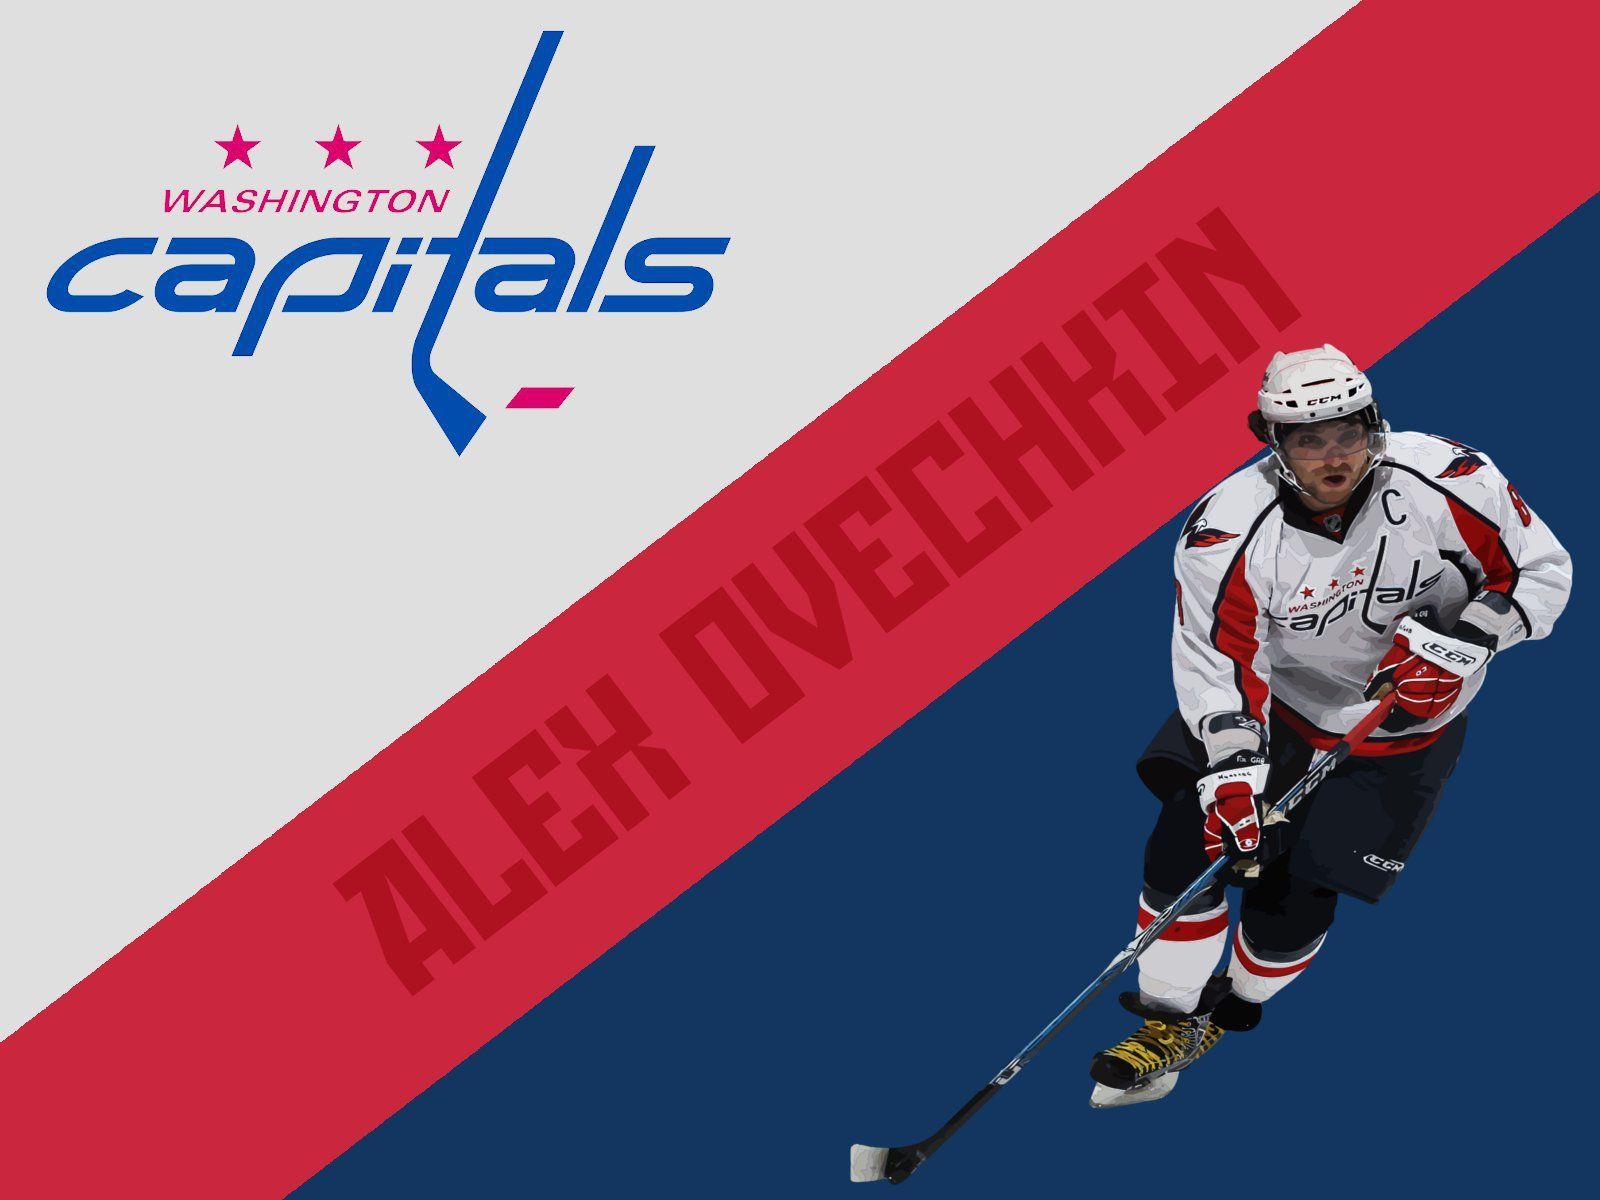 Player of Washington Alexander Ovechkin wallpapers and images